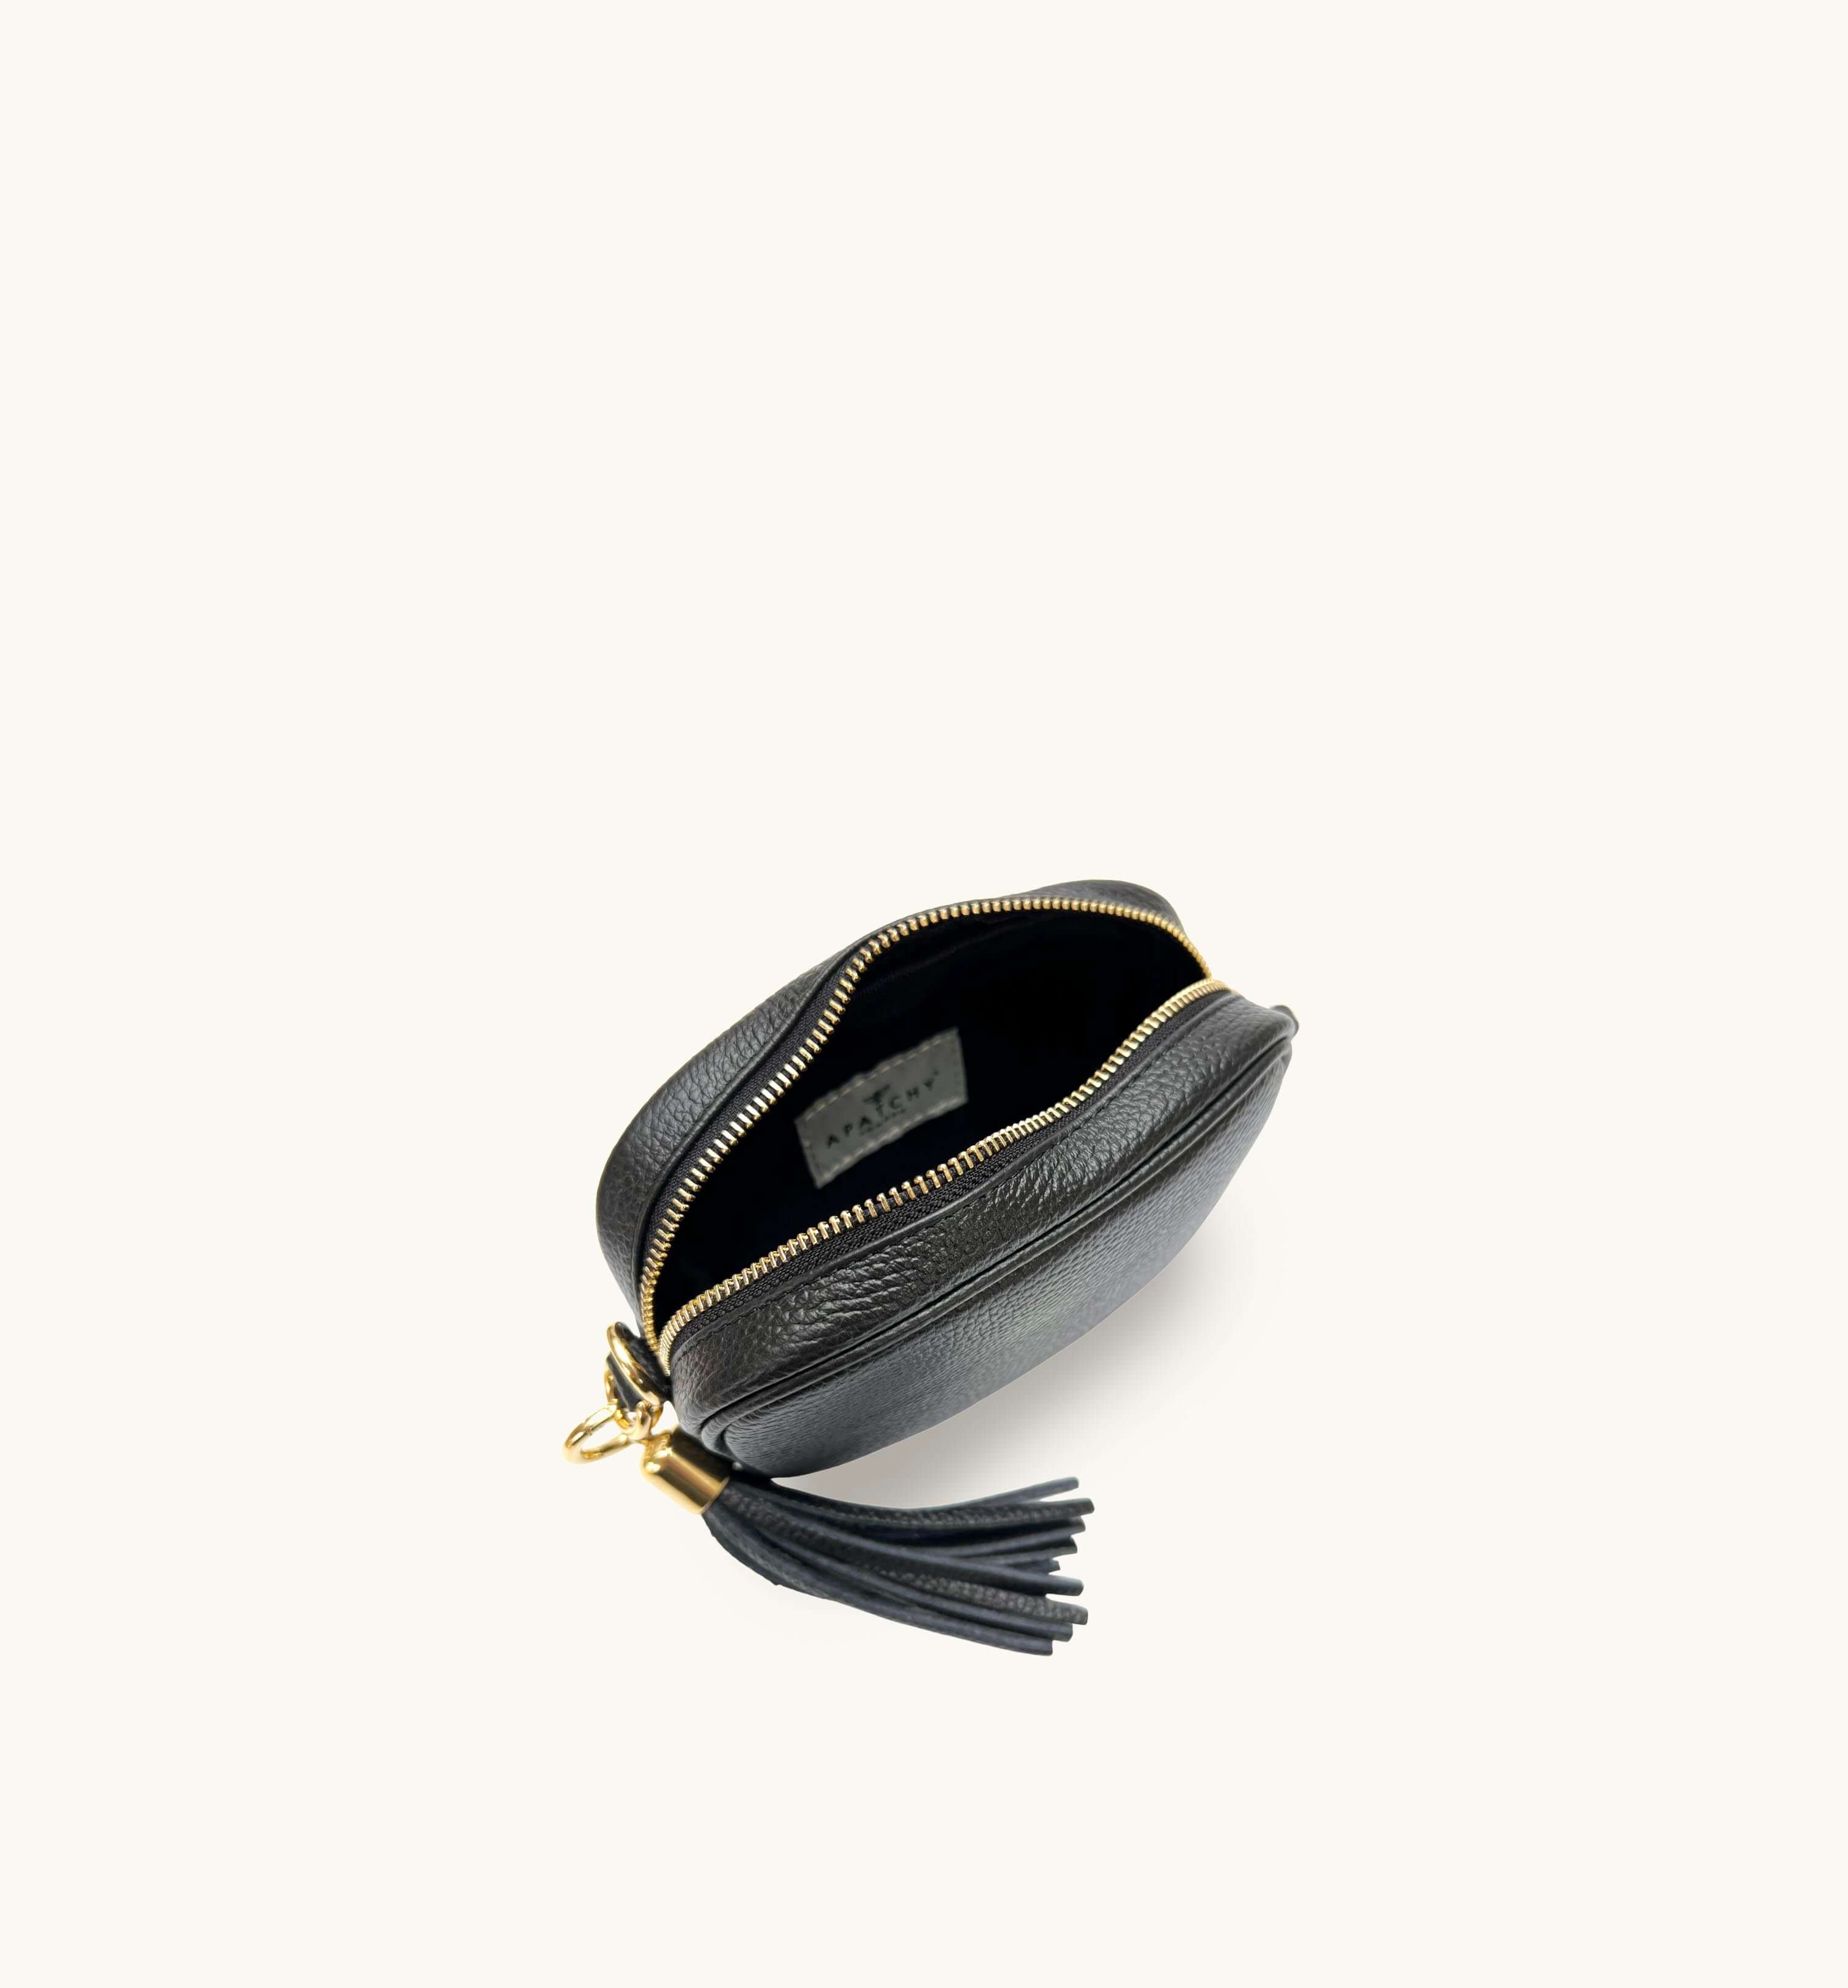 The Mini Tassel Black Leather Phone Bag With Gold Chain Crossbody Strap